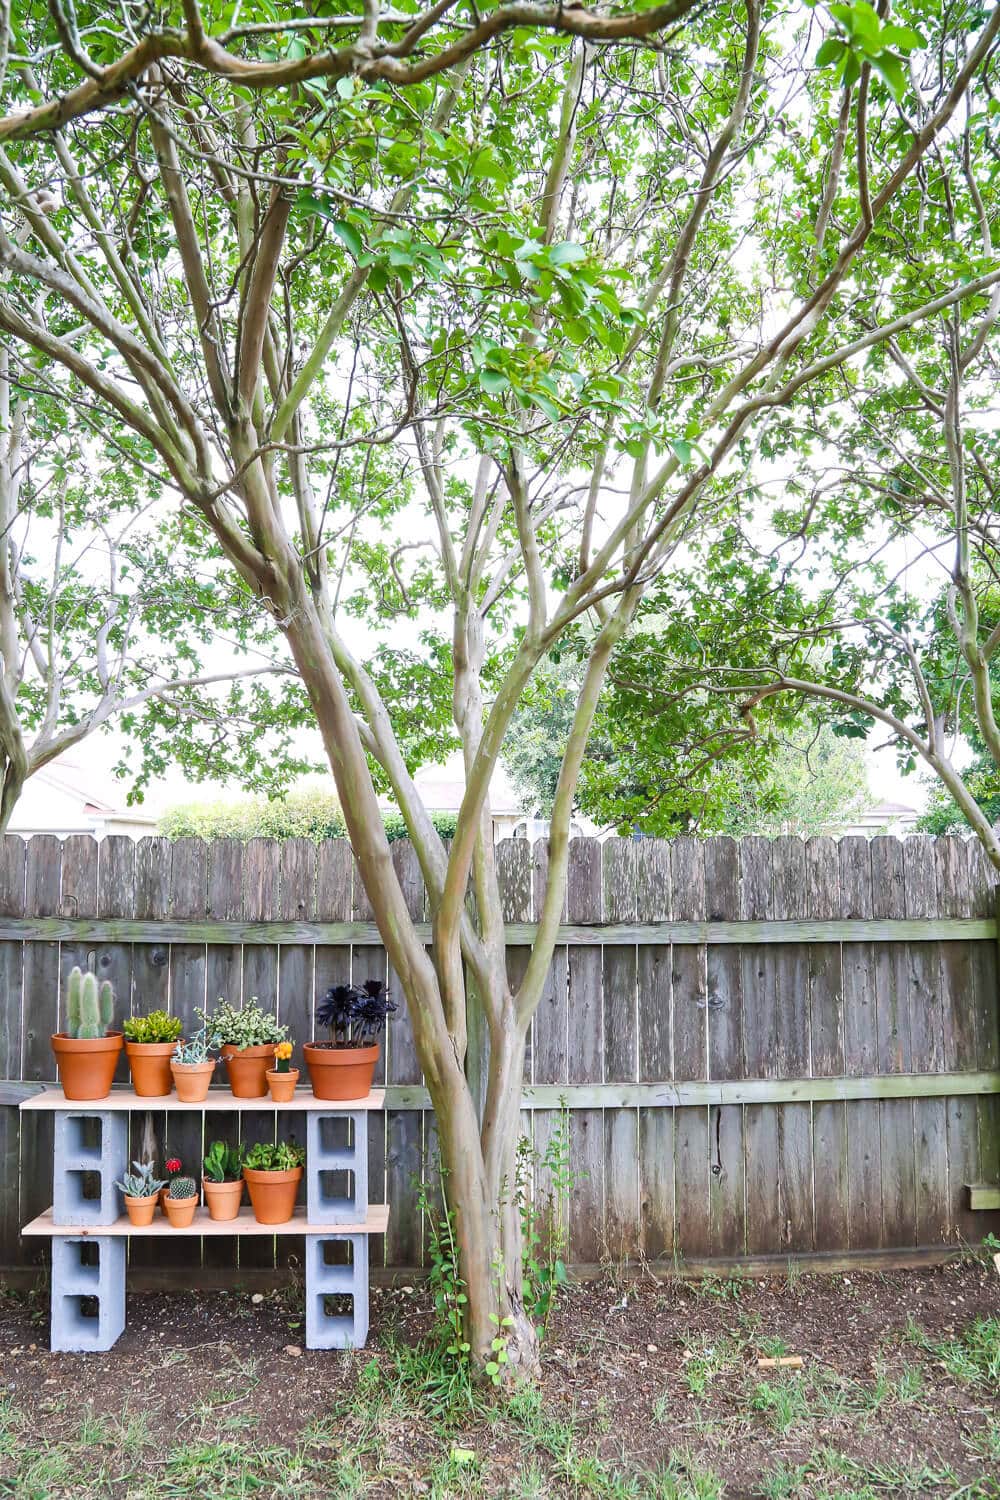 cinder block shelves with plants next to a fence